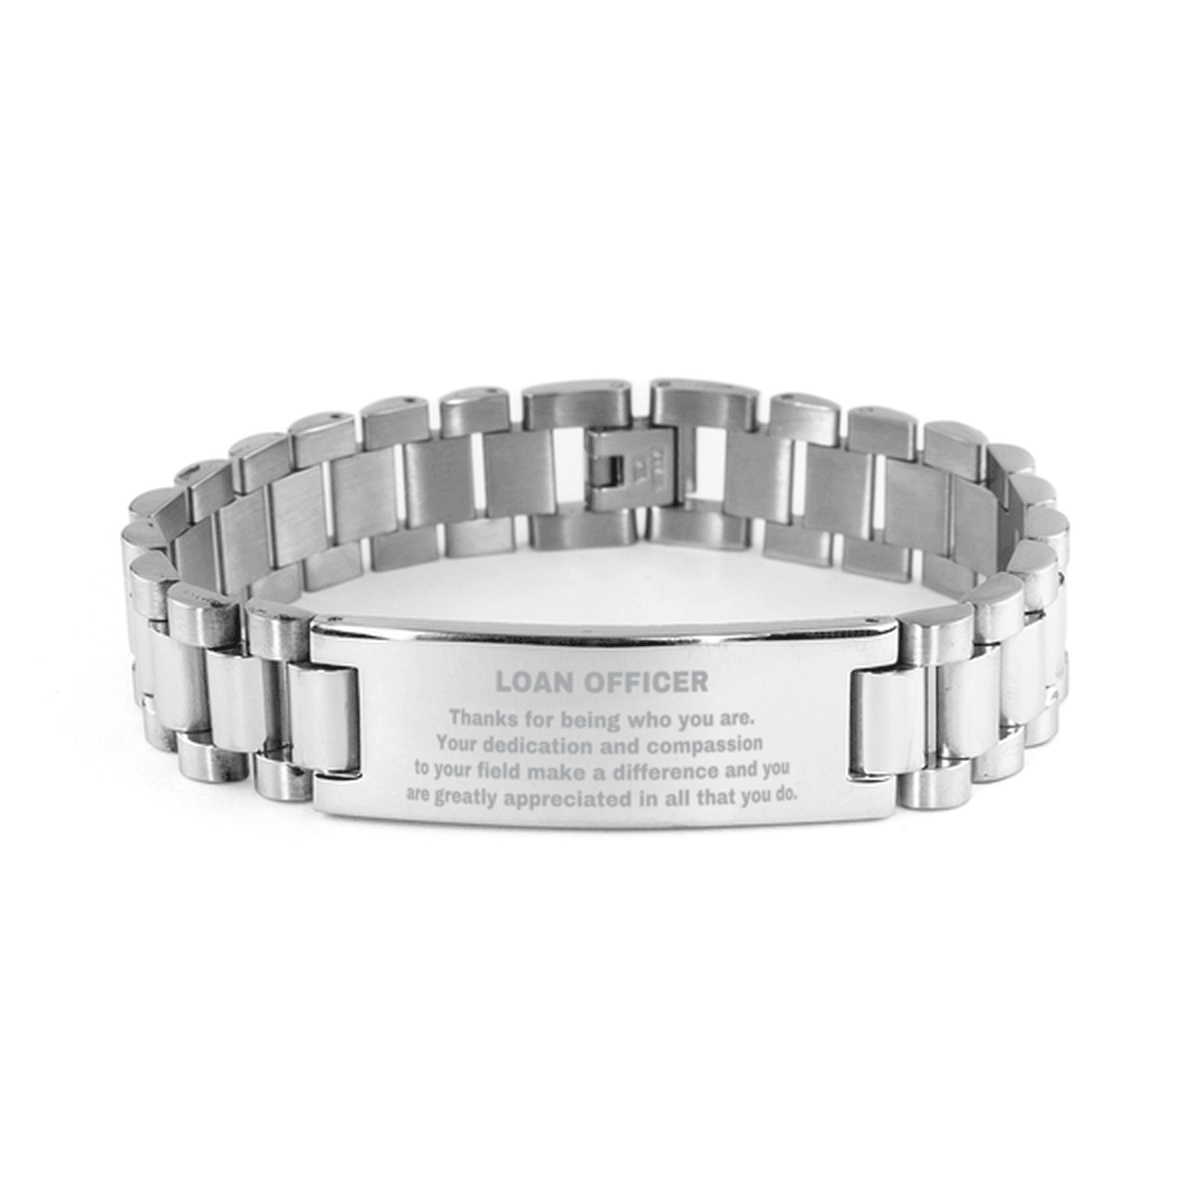 Loan Officer Ladder Stainless Steel Engraved Bracelet - Thanks for being who you are - Birthday Christmas Jewelry Gifts Coworkers Colleague Boss - Mallard Moon Gift Shop